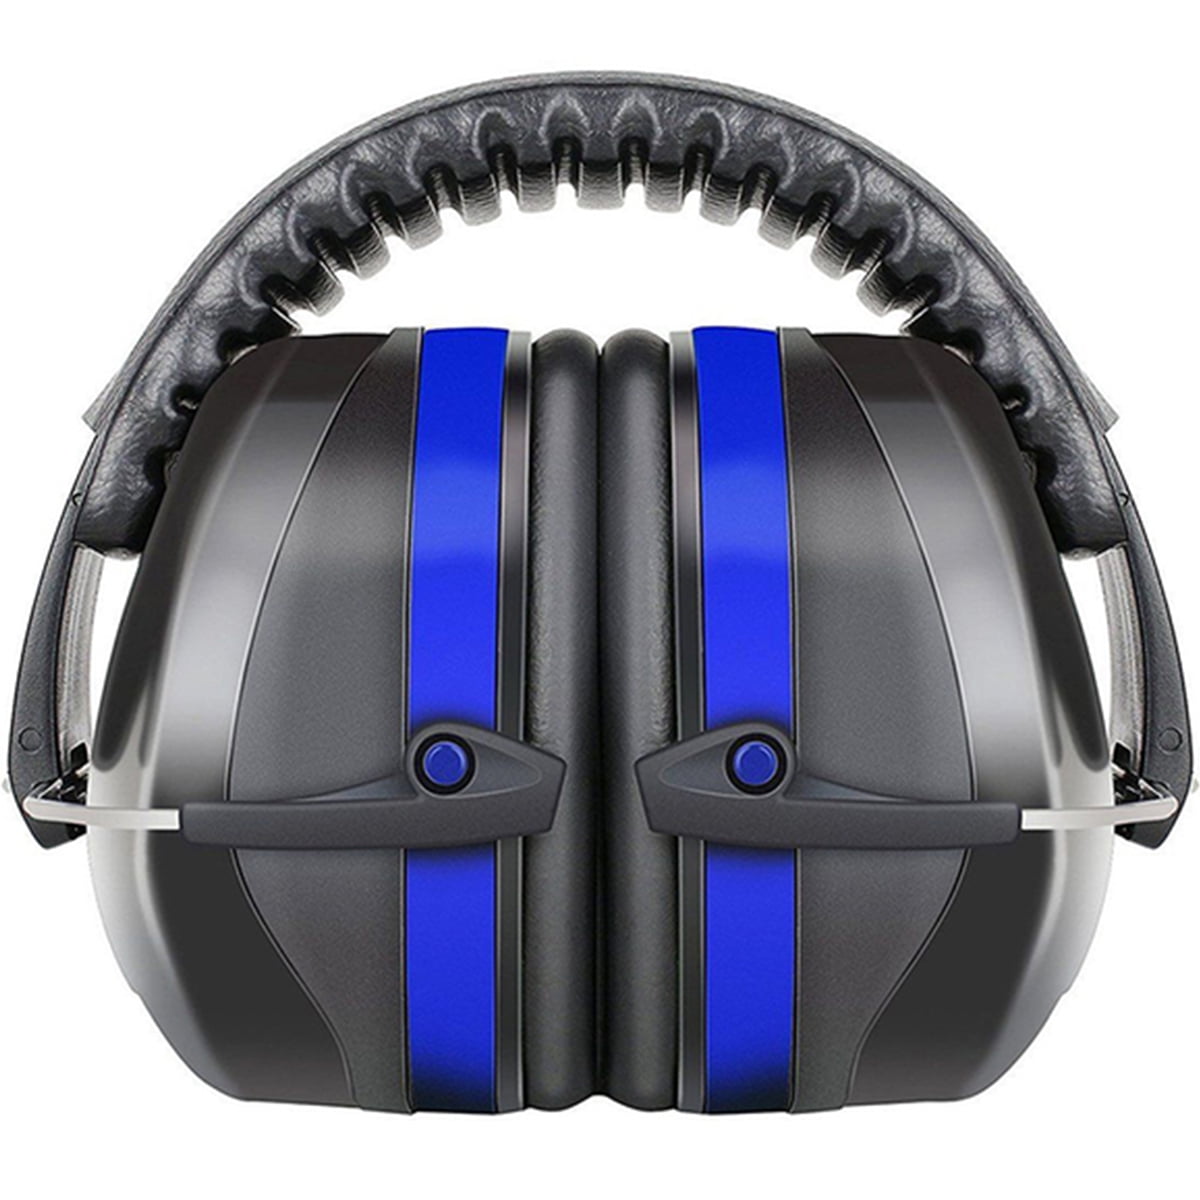 INDUSTRIAL EAR MUFFS NOISE REDUCTION Construction Shooting Range 